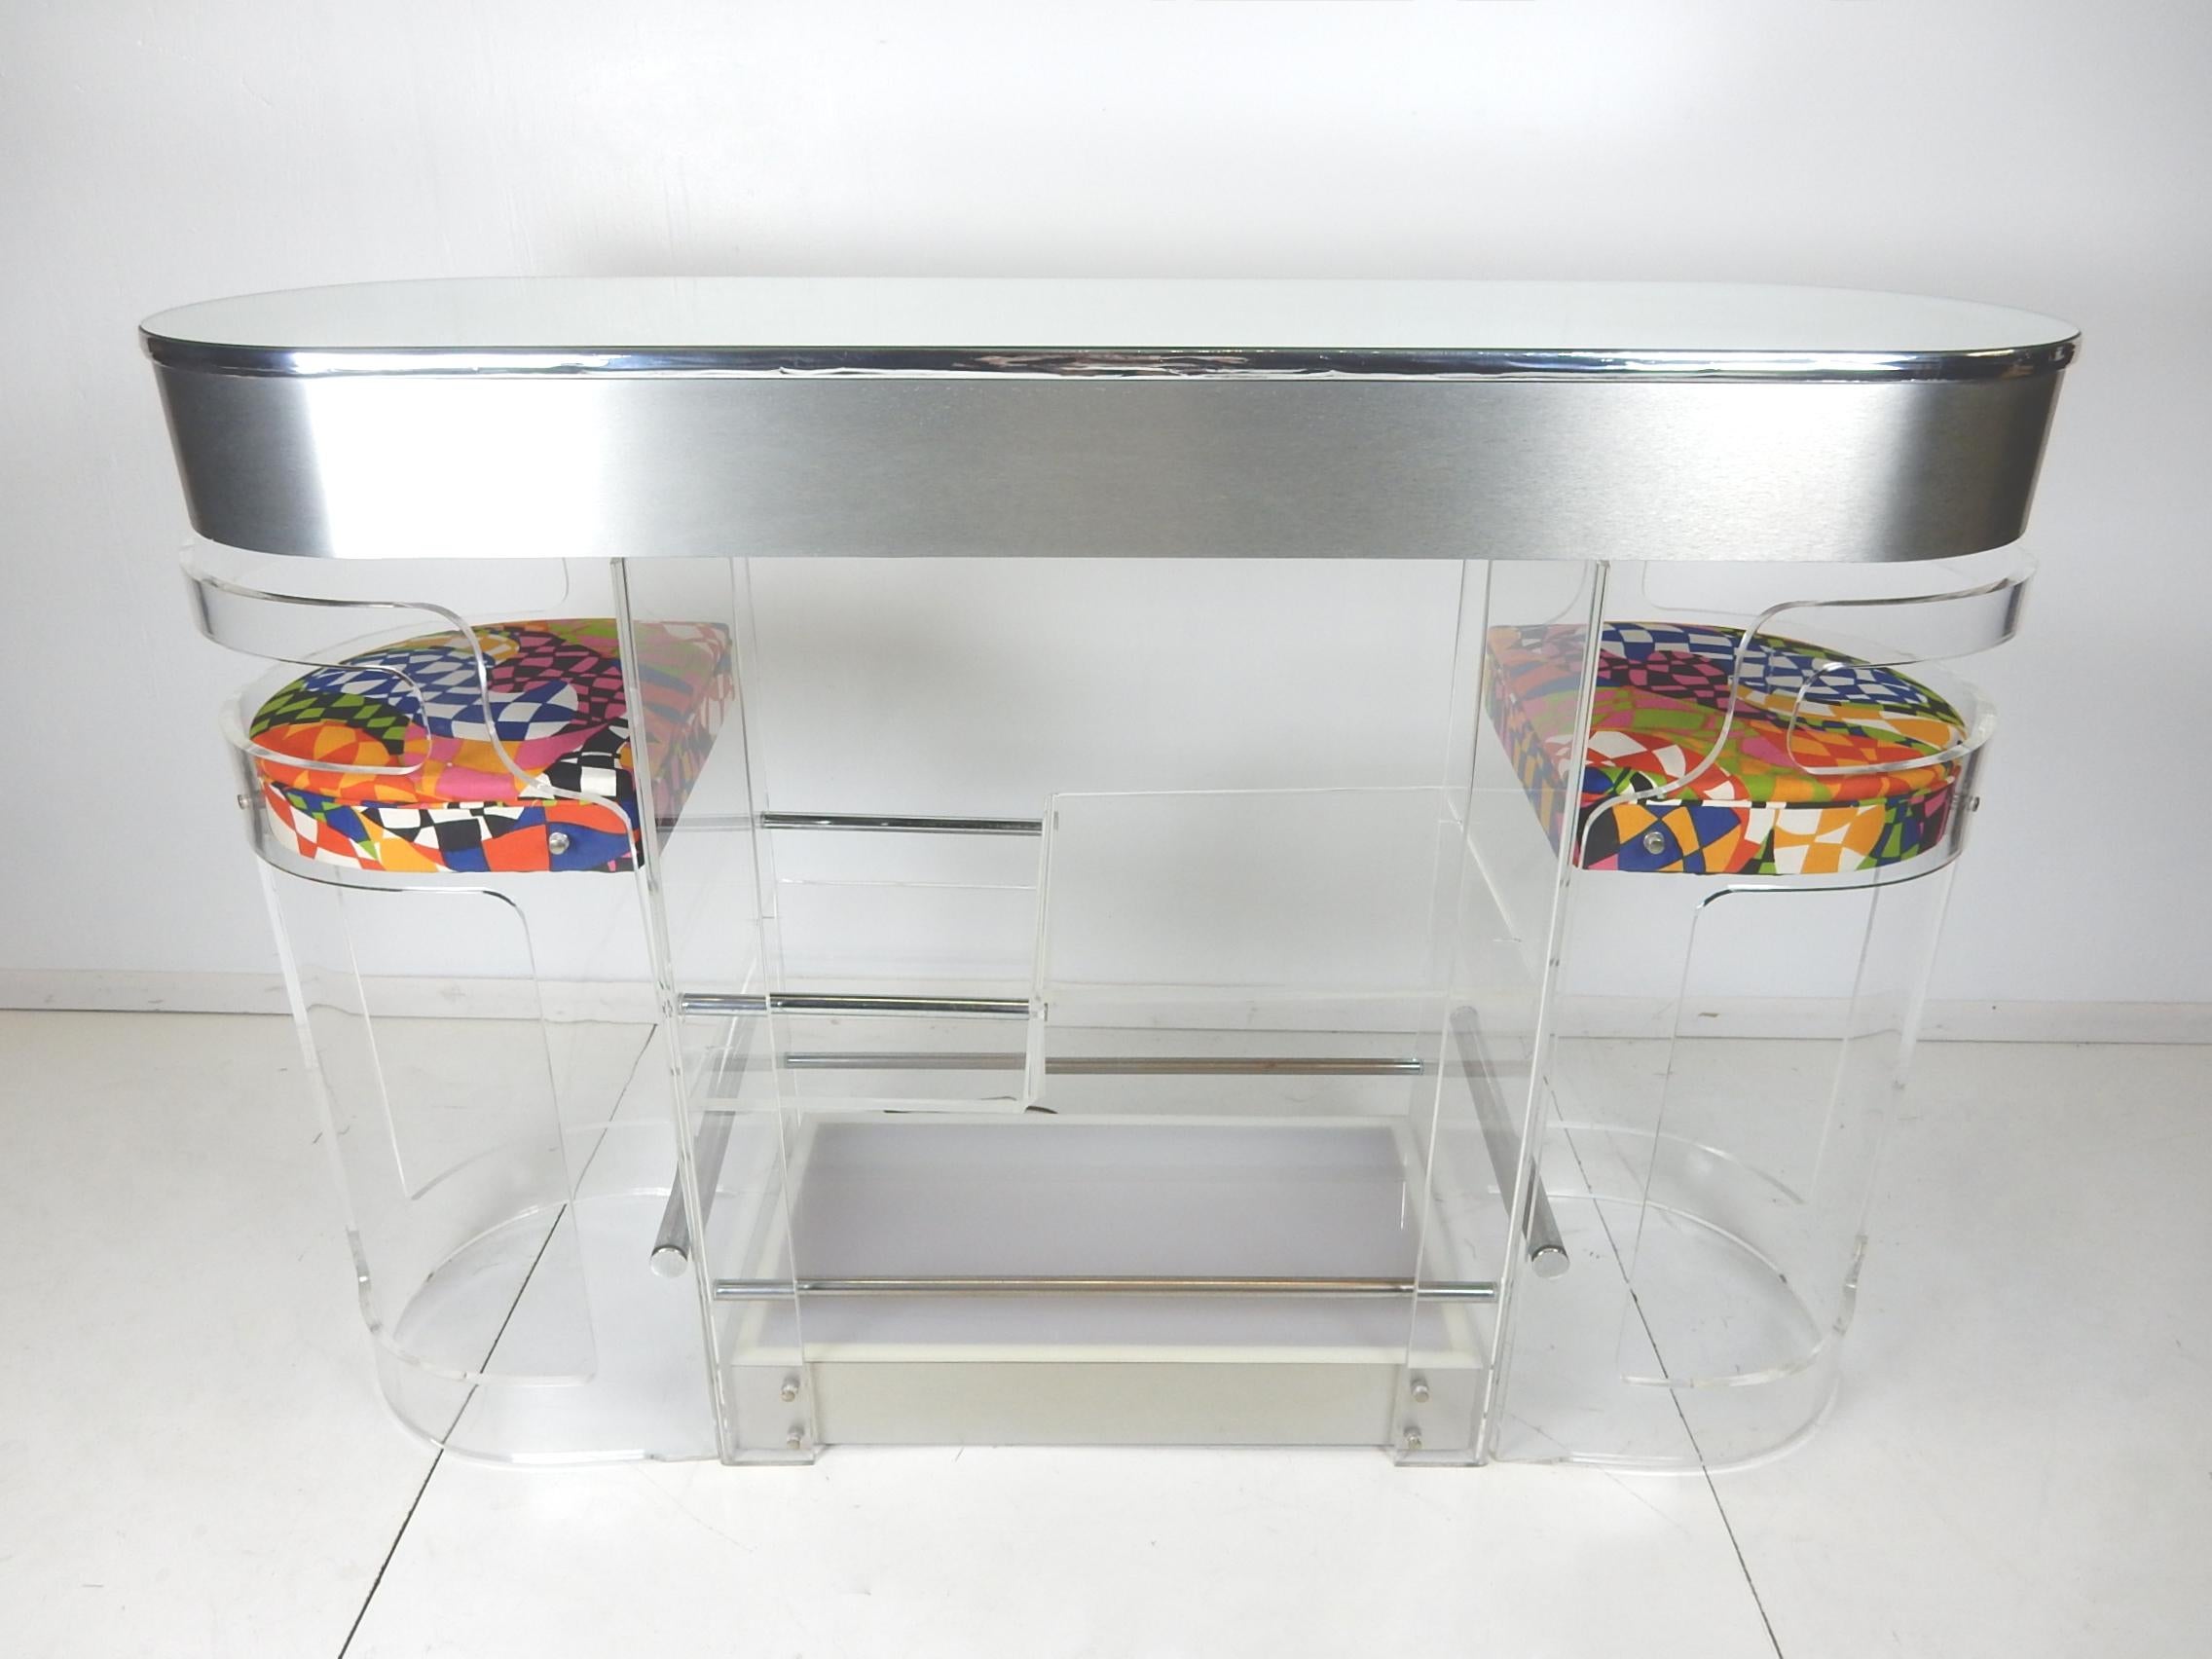 Mirror top Lucite bar with two matching stools by Hill Manufacturing, circa 1970s
Multi level shelf's, supported by chrome rods, for storing mixology needs. Eight bottle storage slots on the bar tenders side.
Two stools tuck neatly in on either